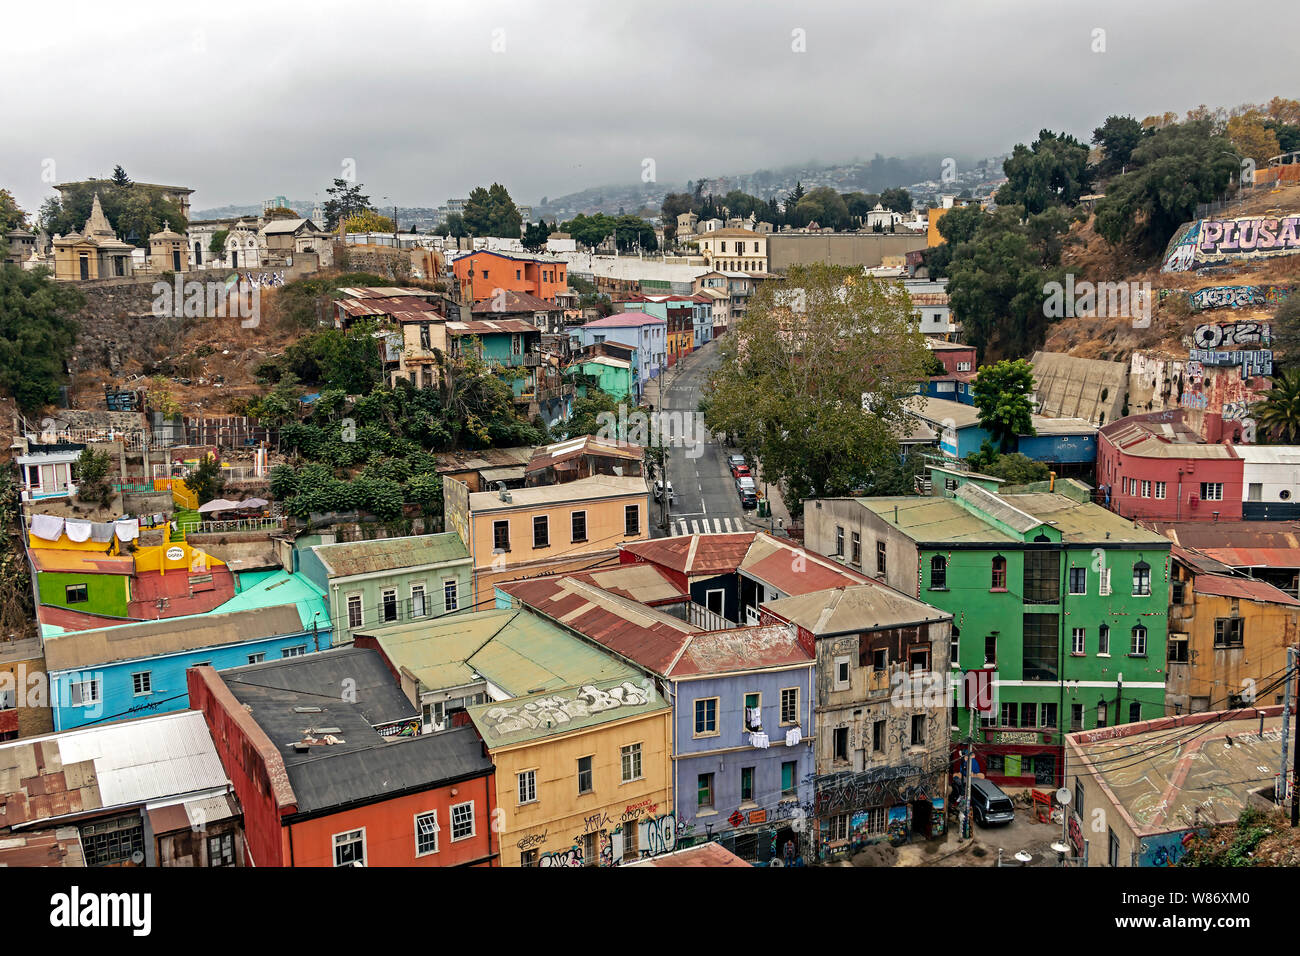 Poor suburb of Valparaiso with roofs and colorful houses located on the hillslopes, colourful architecture of Valparaiso is UNESCO heritage, Chile Stock Photo